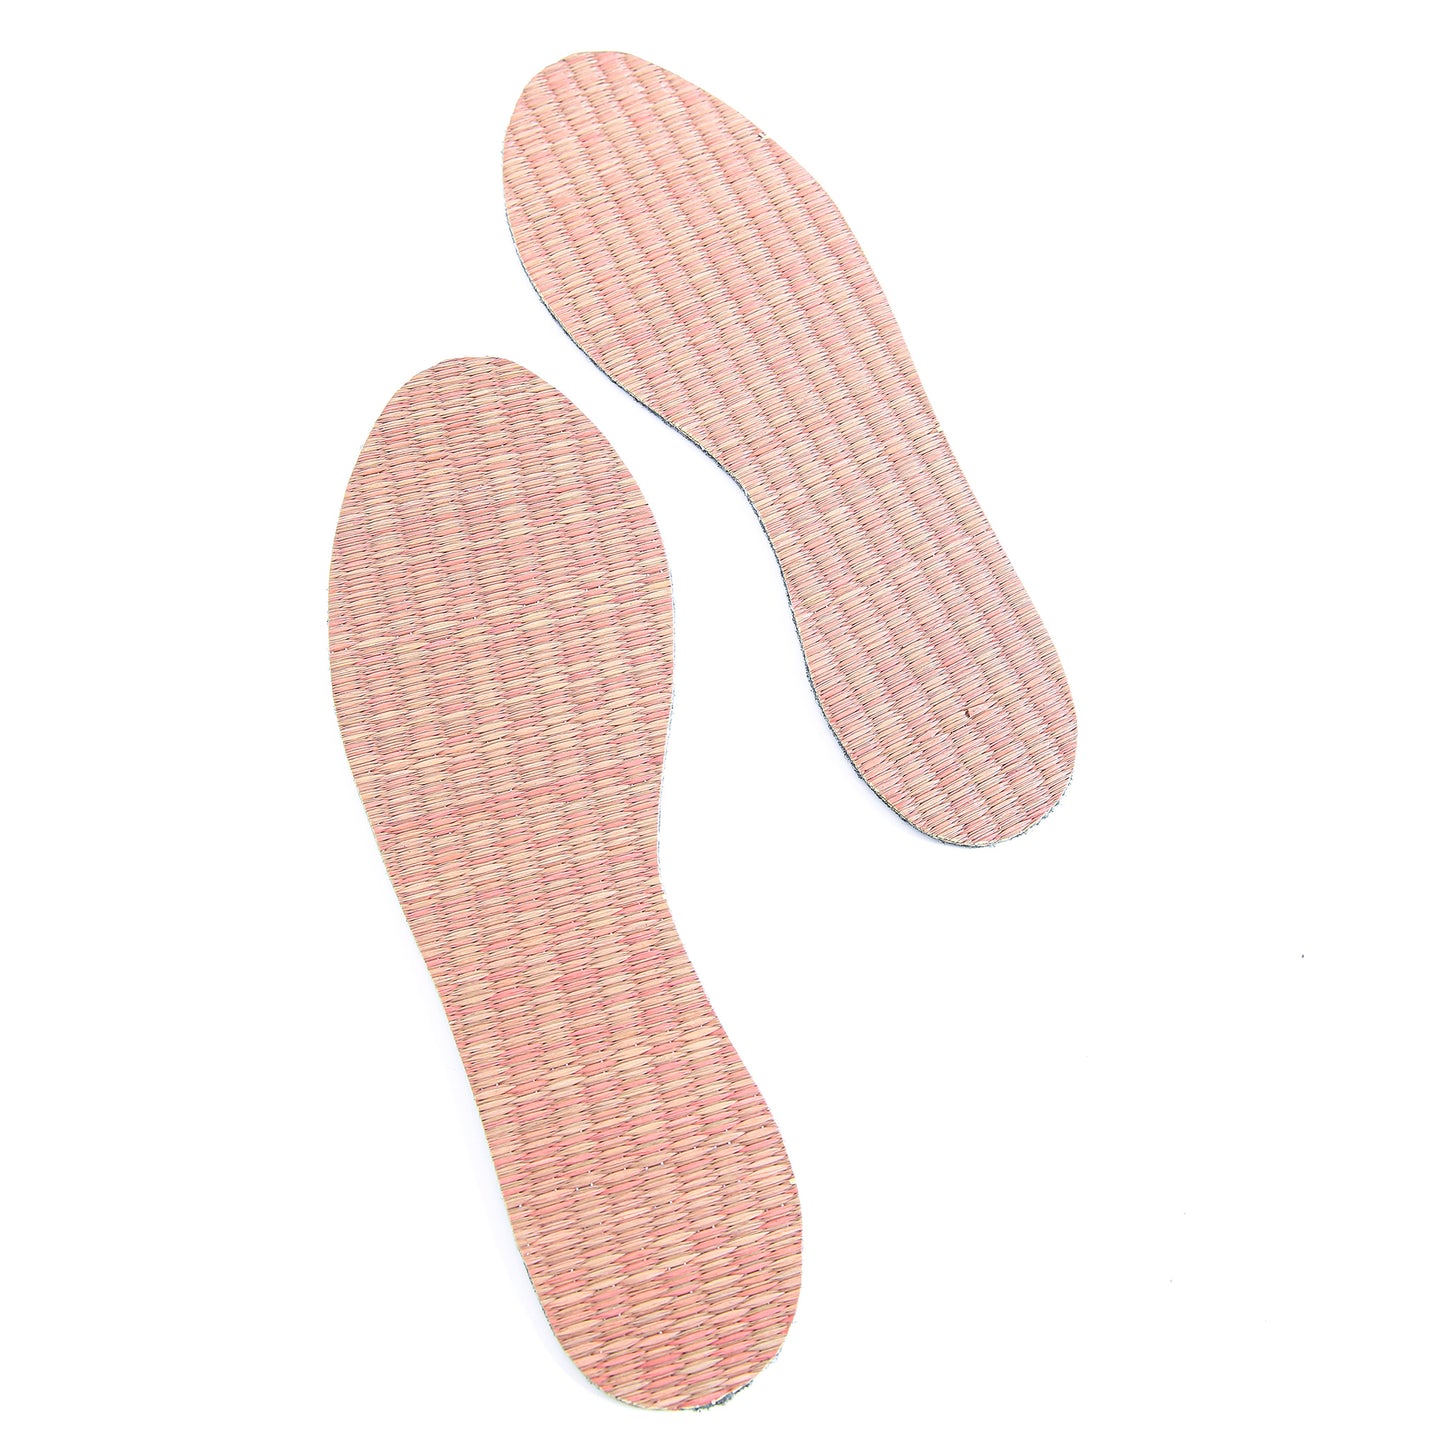 Japanese rush grass insoles that can be cut to fit shoes, for prevention of athlete's foot and foot swelling